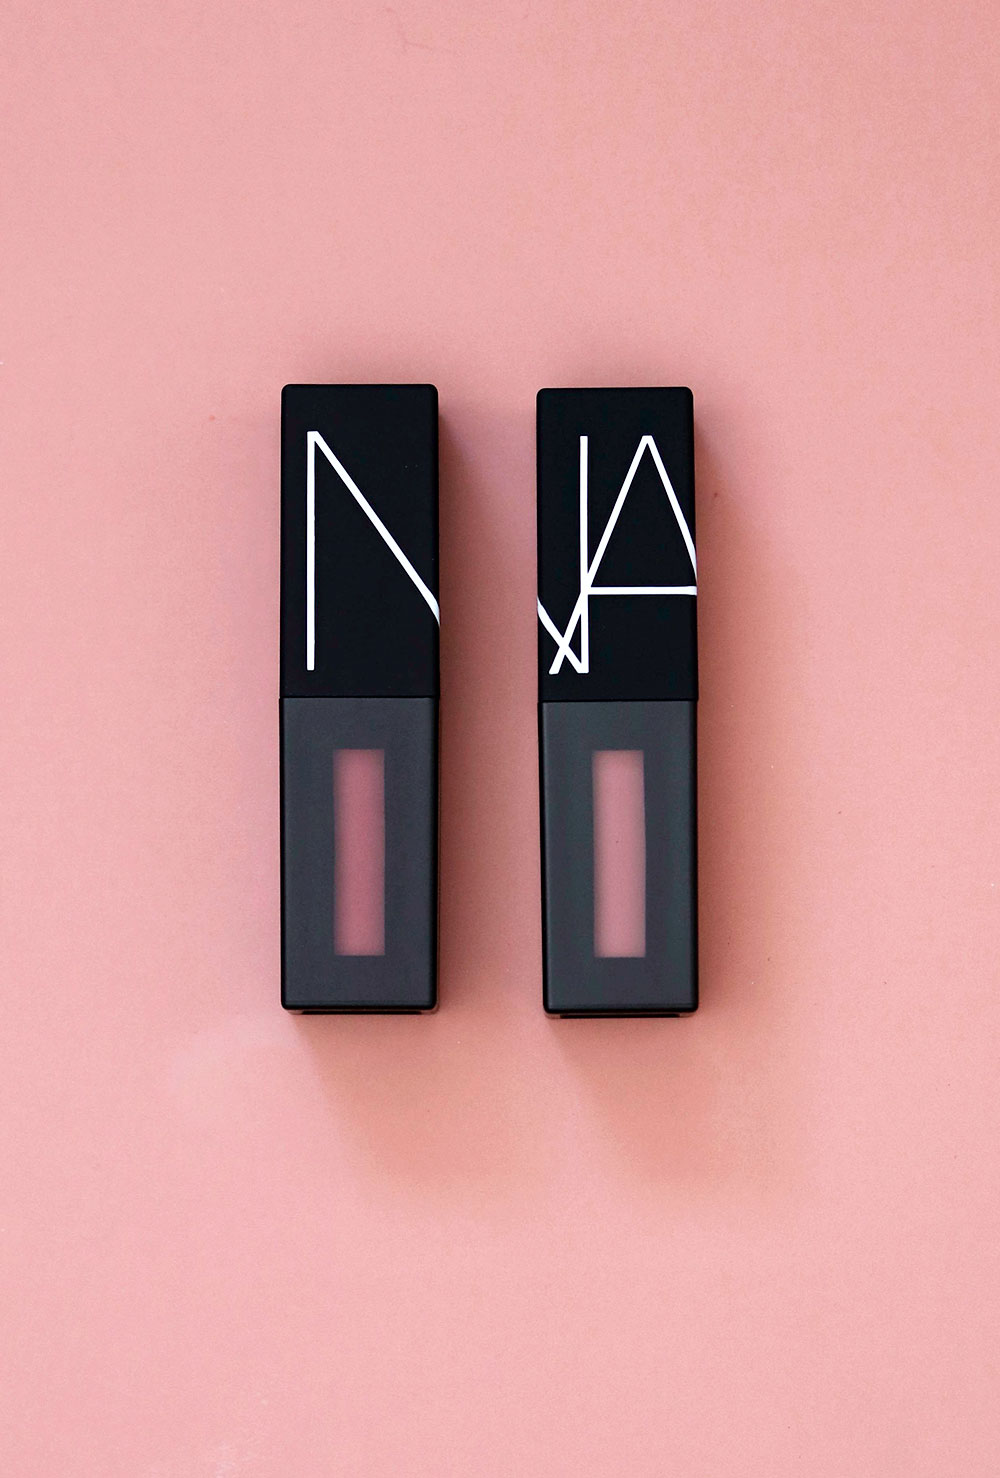 nars wanted power pack lip kit cool nudes